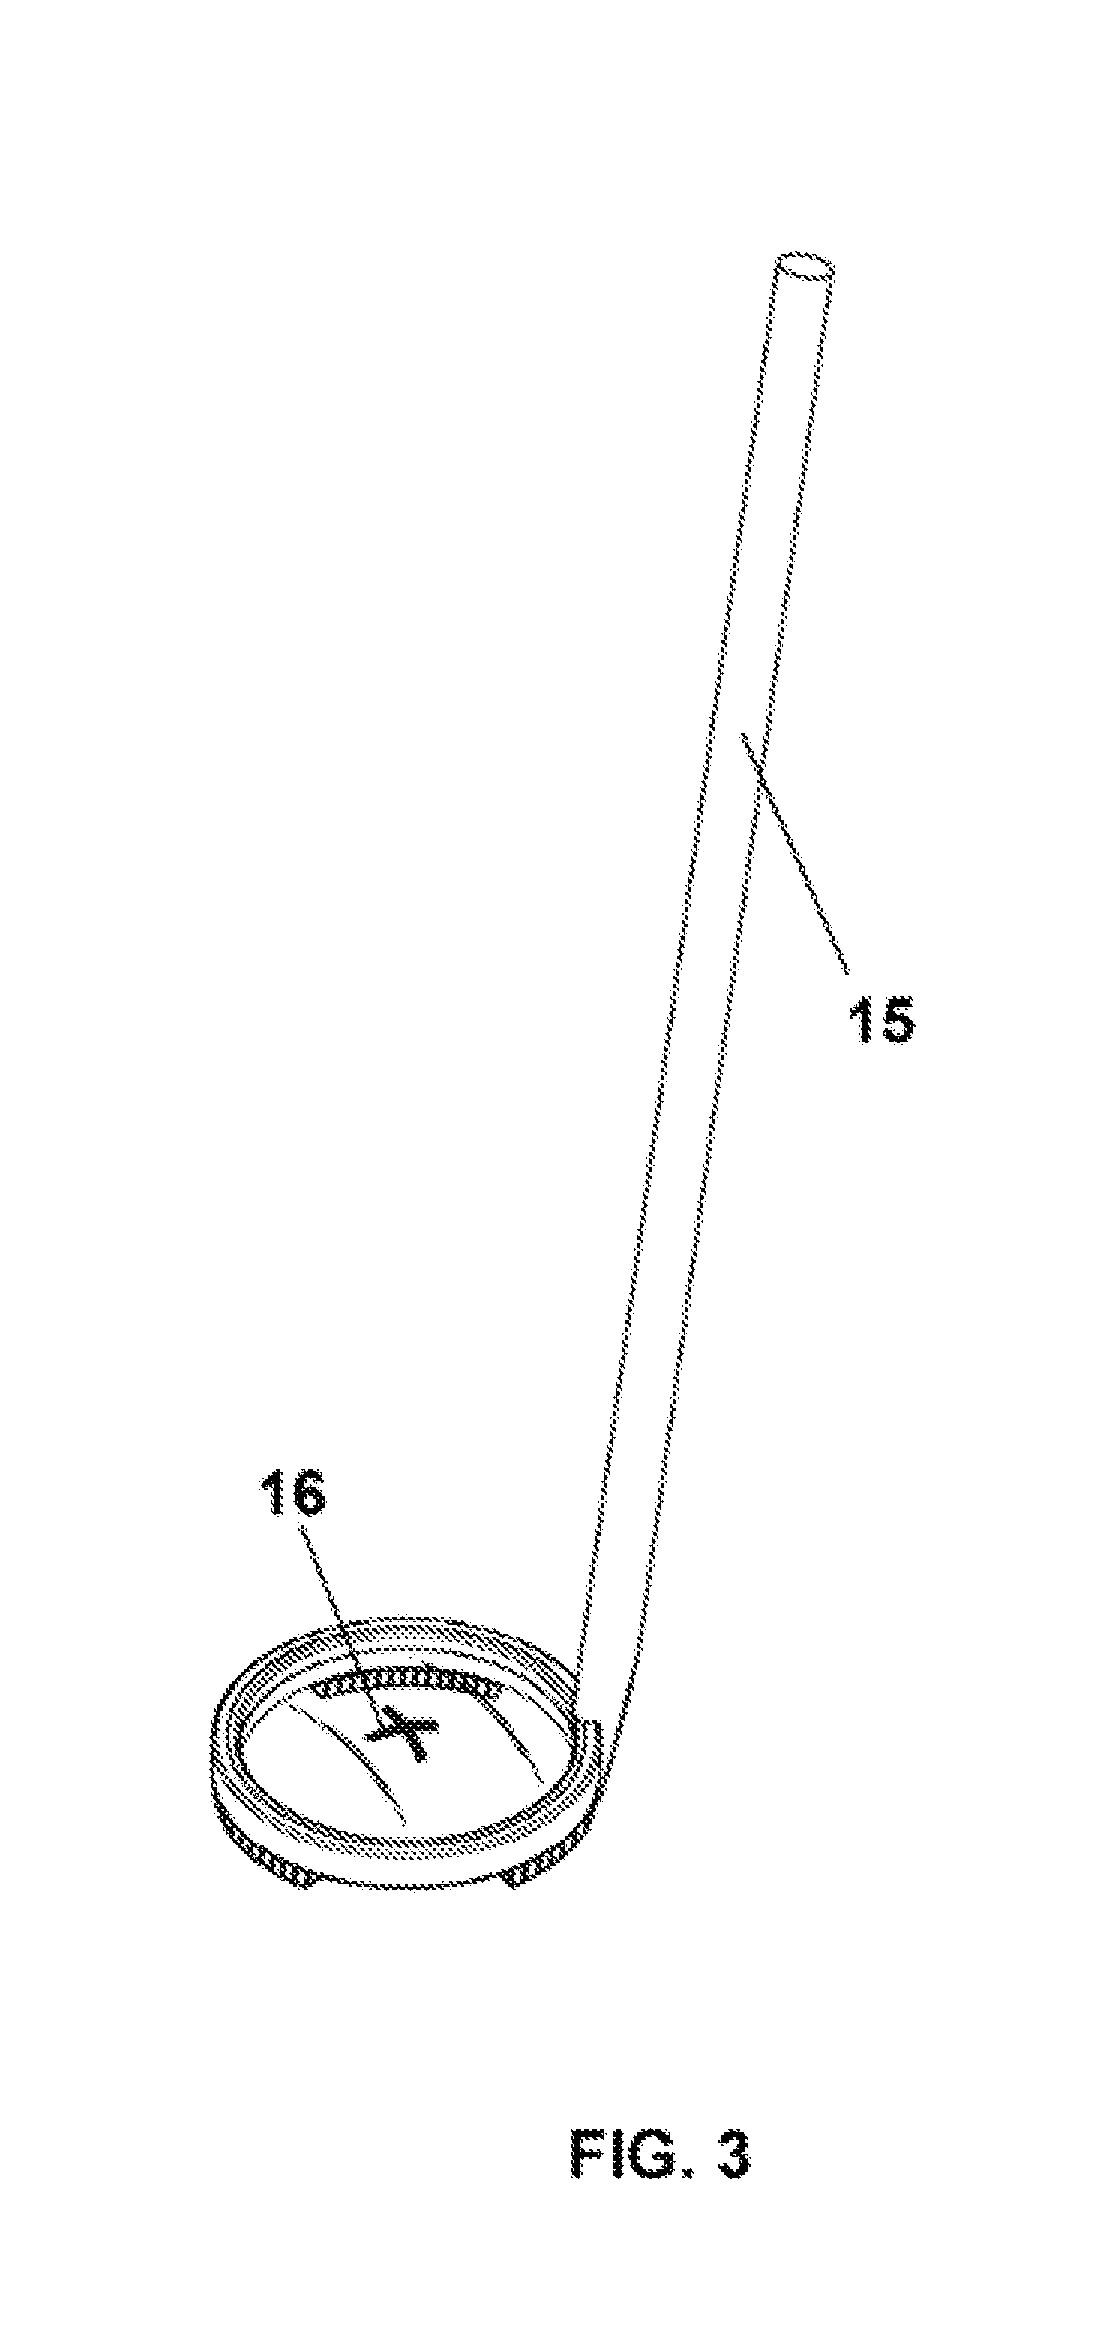 Human-computer interface device and system